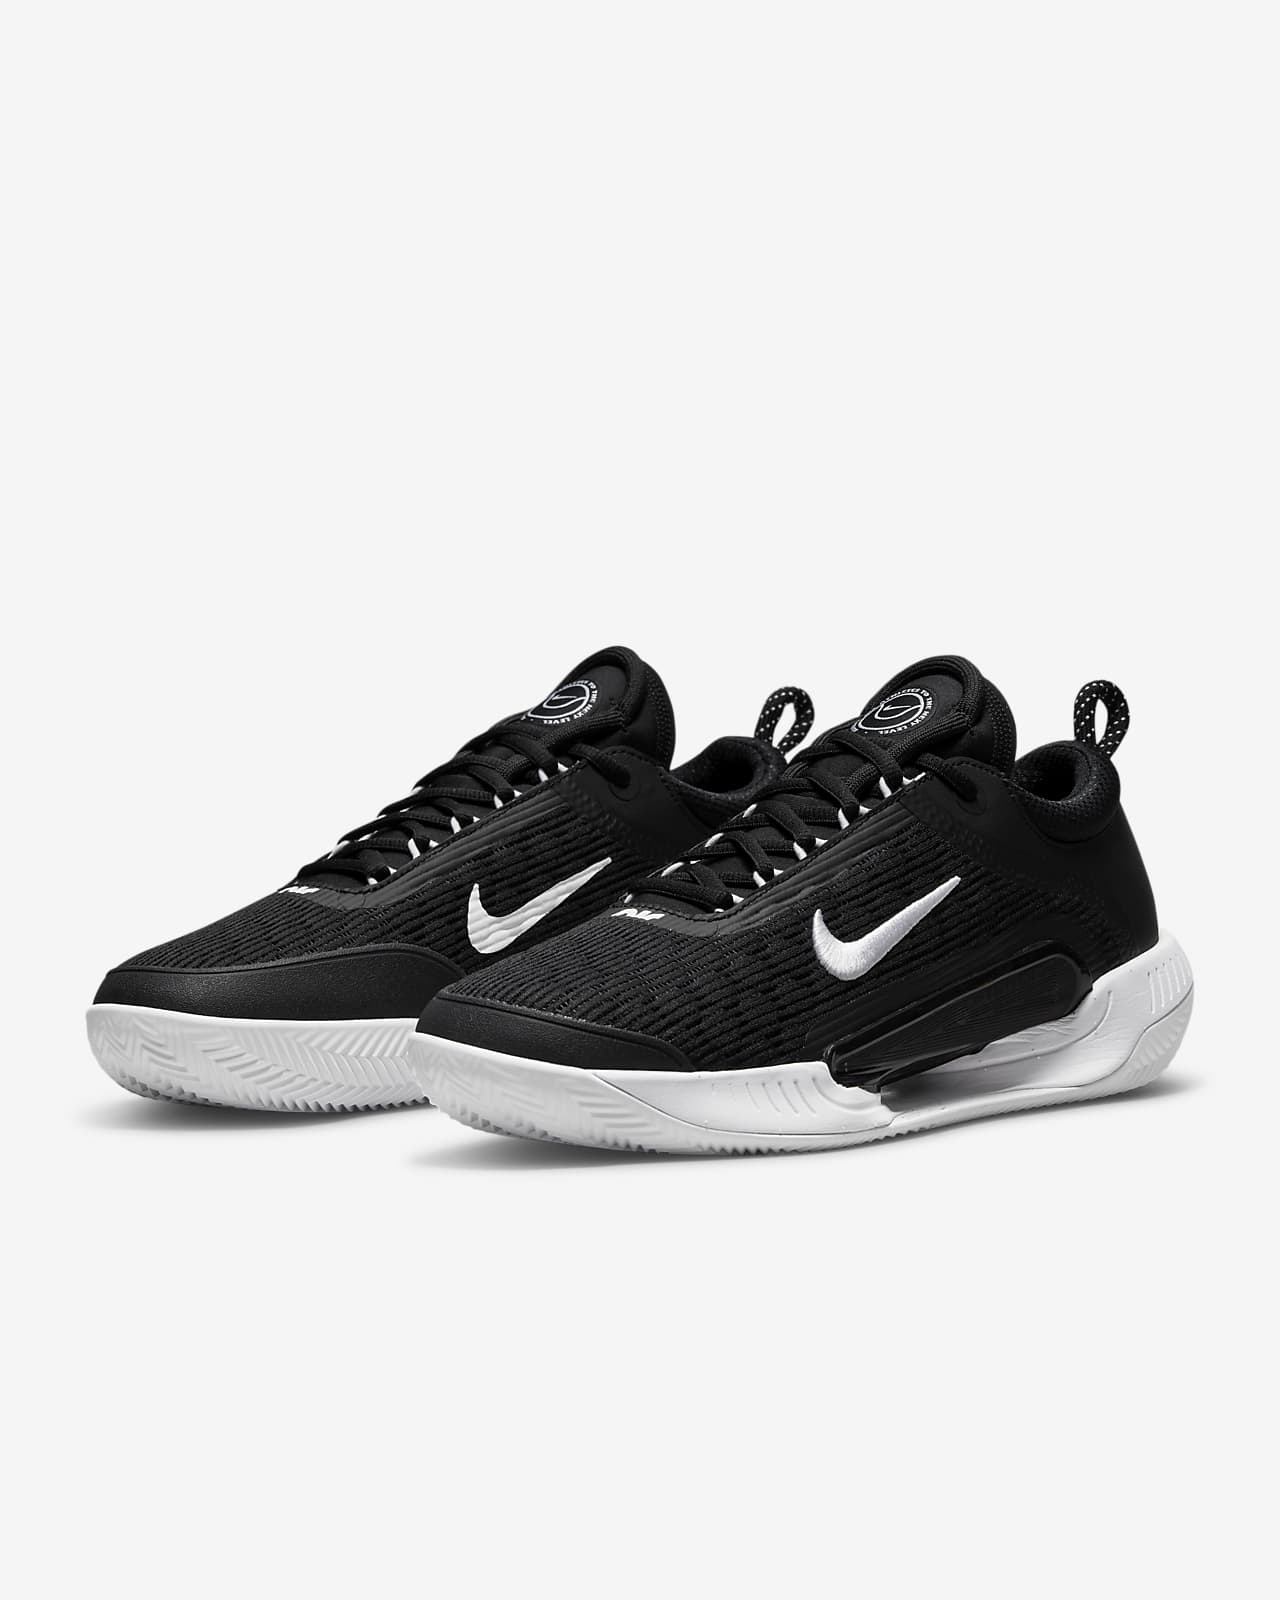 NikeCourt Zoom NXT Men's Clay Court Tennis Shoes. Nike BE